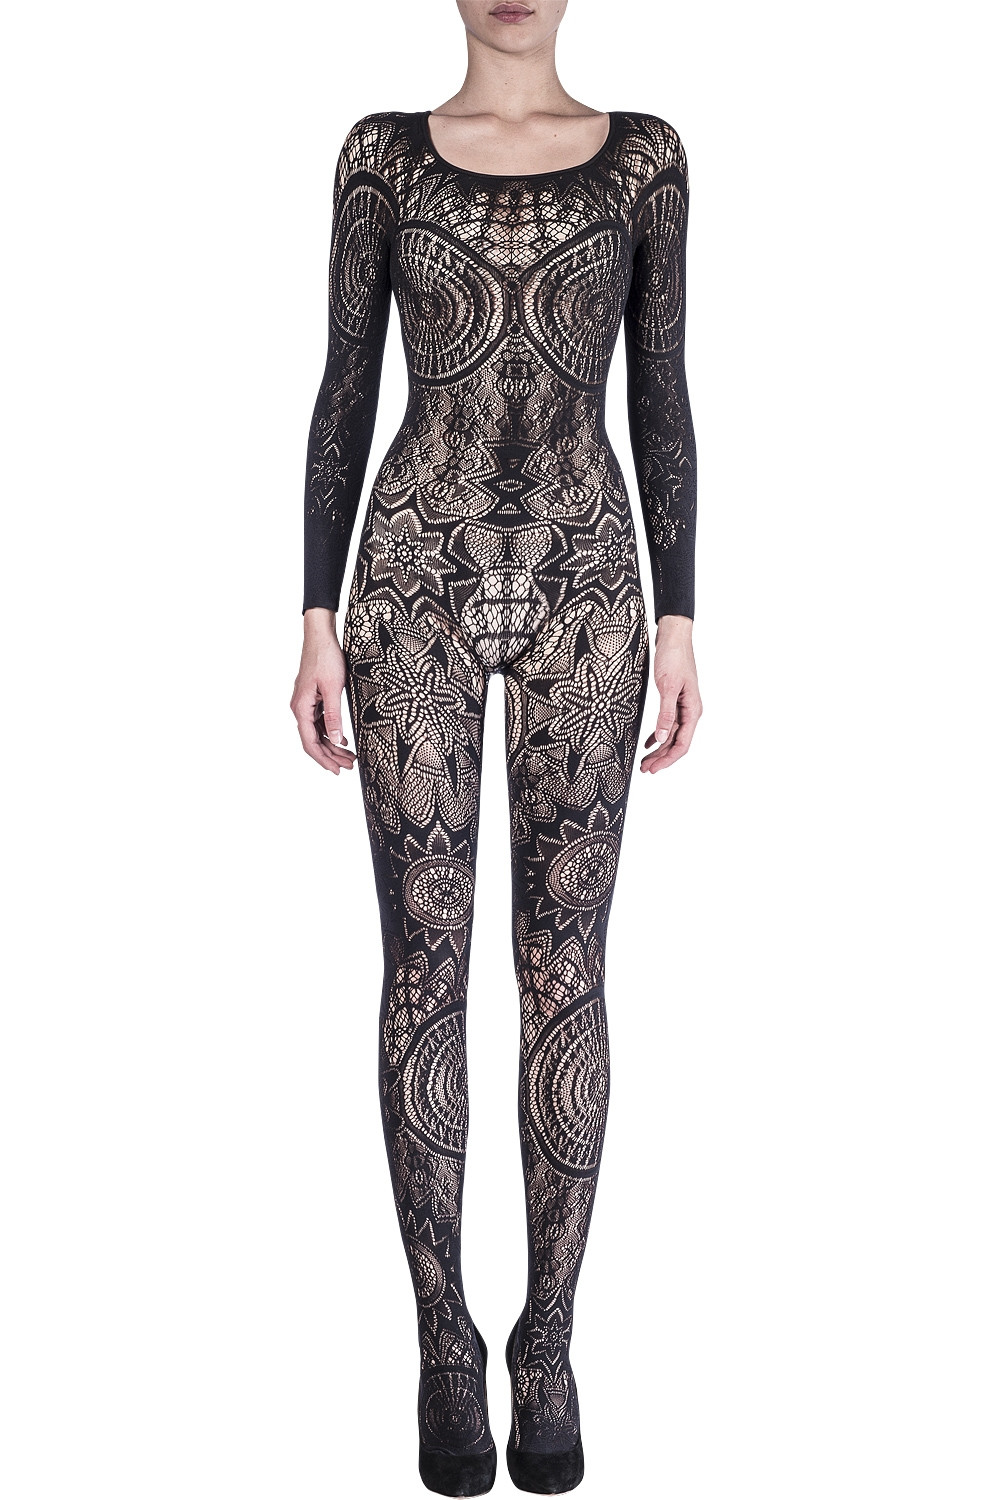 Buy Lace Body Suit Online In India -  India